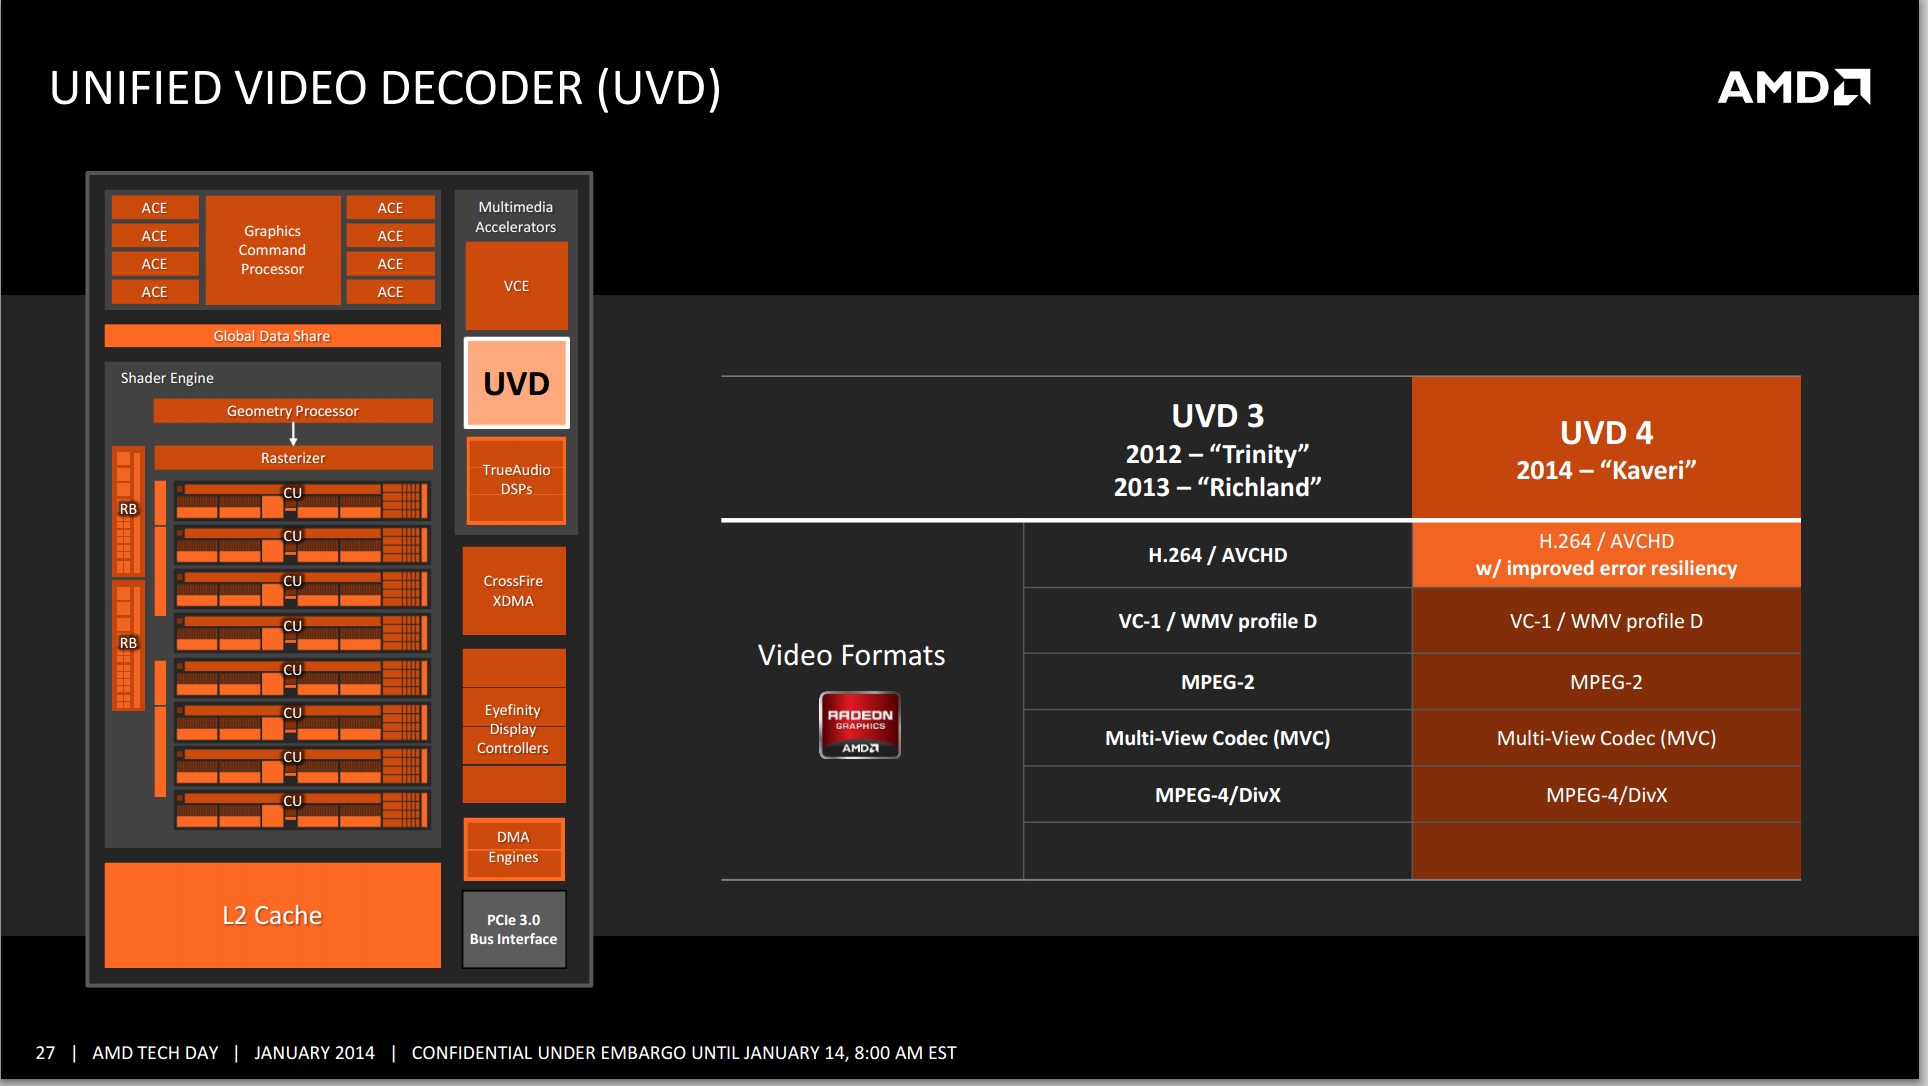 Unified Video Decoder